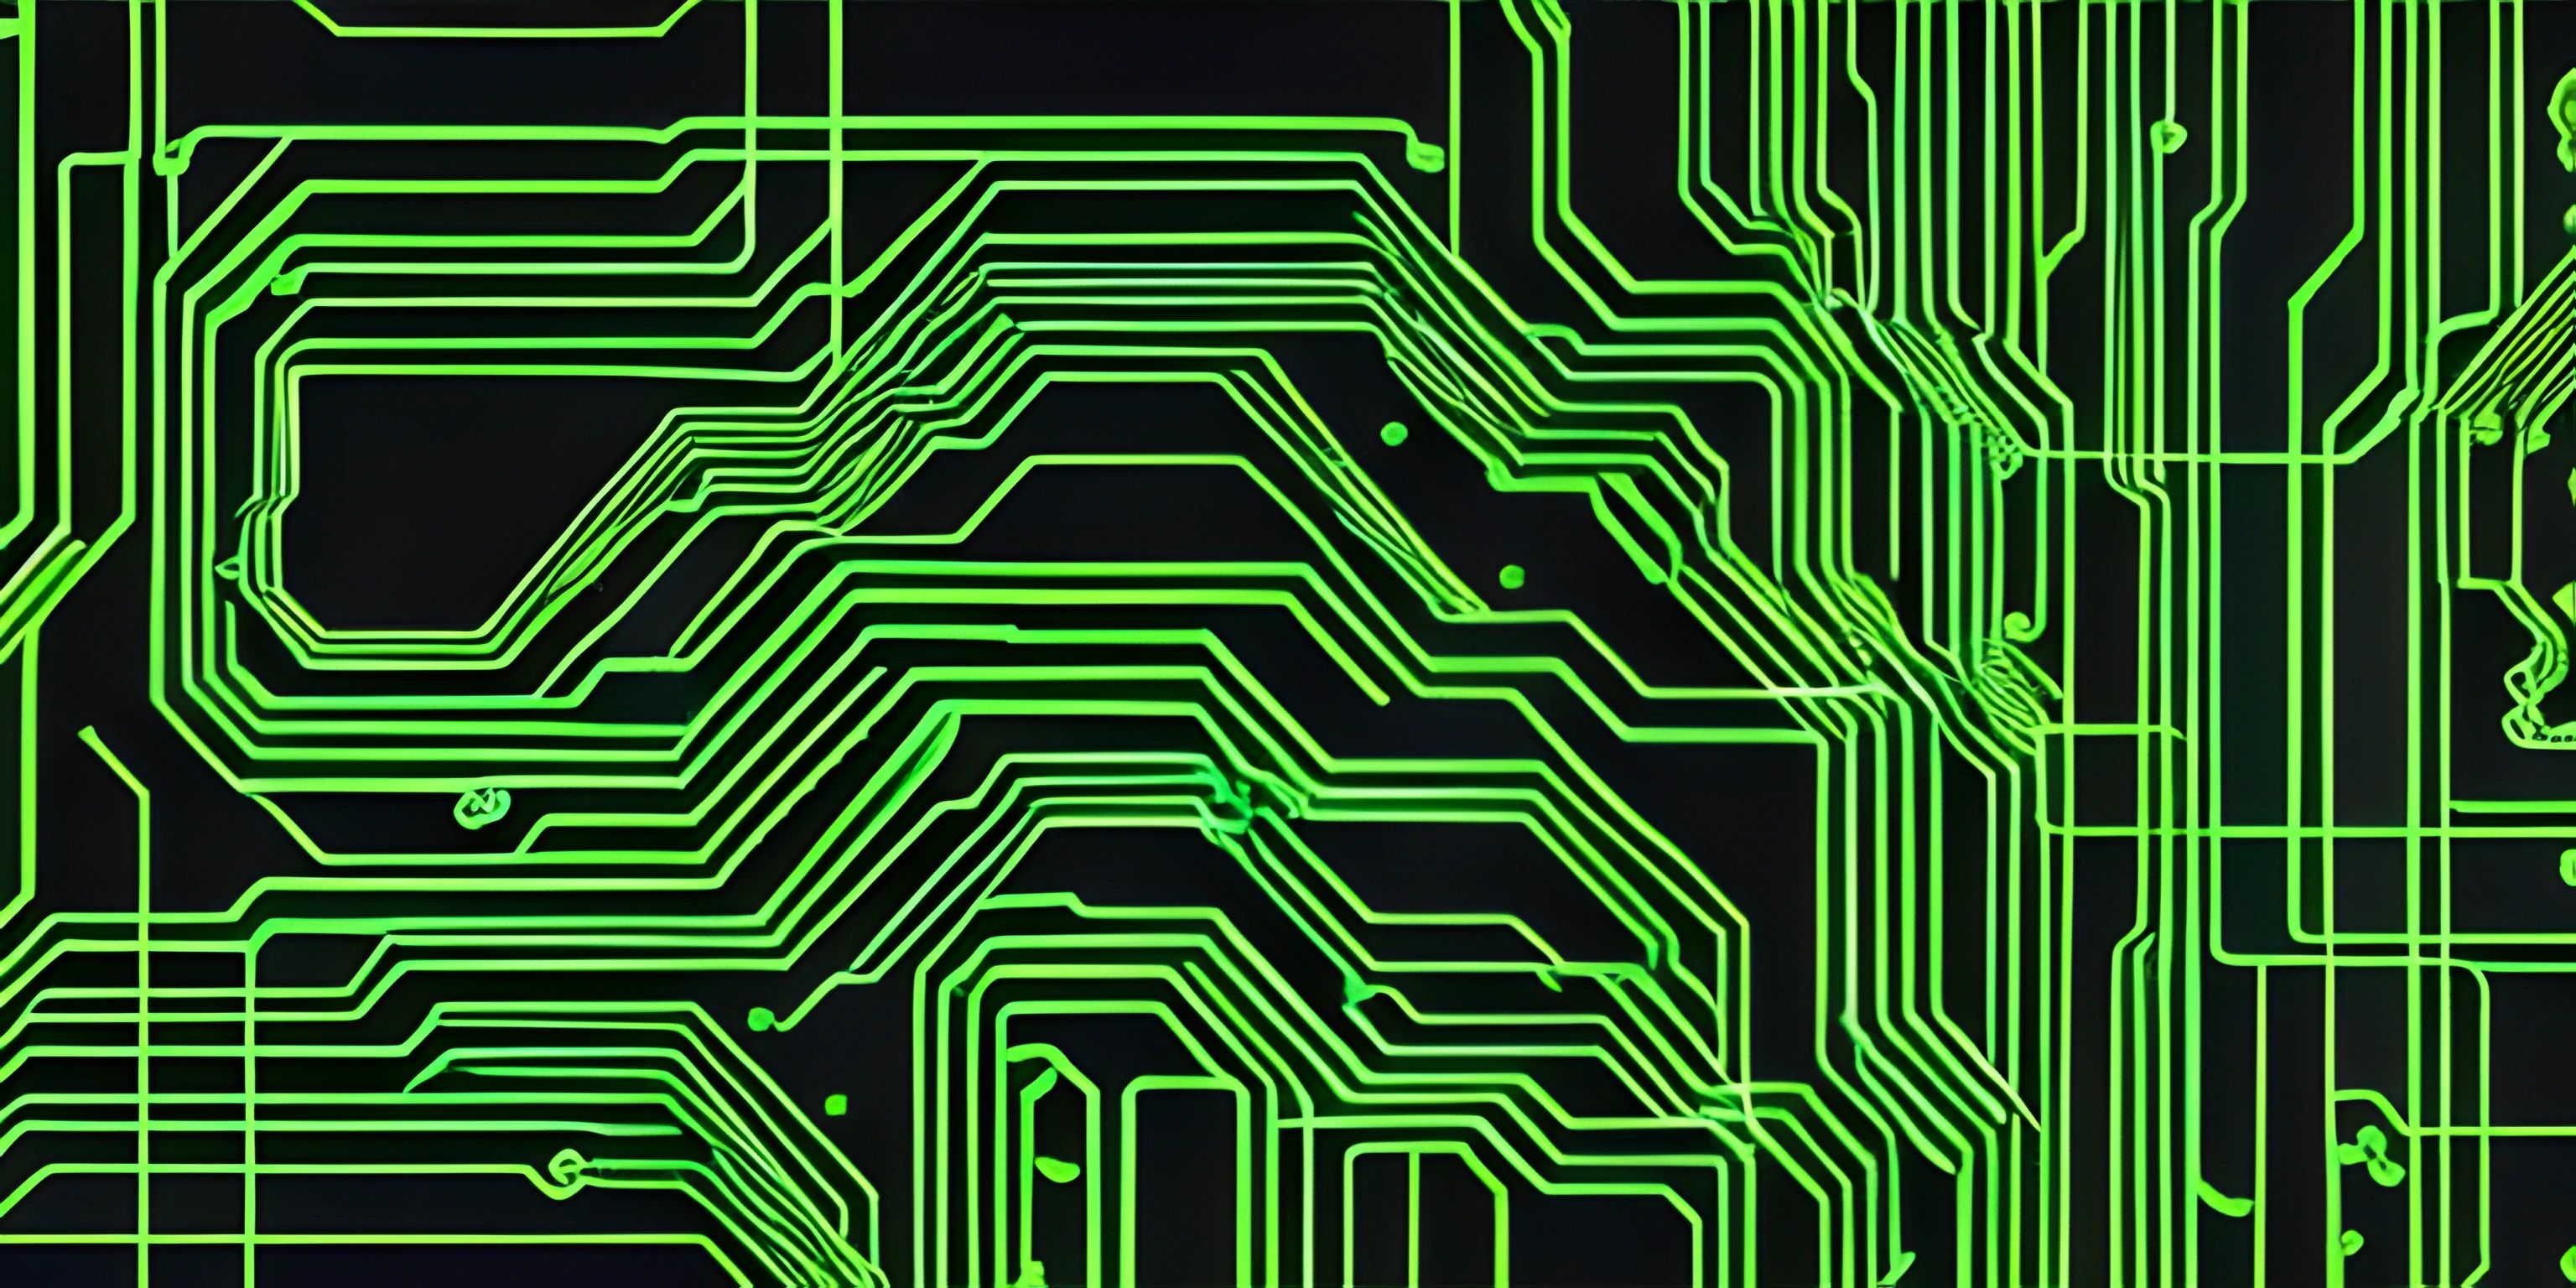 a green and black circuit board pattern on black background photo provided by istc image by mark mclay